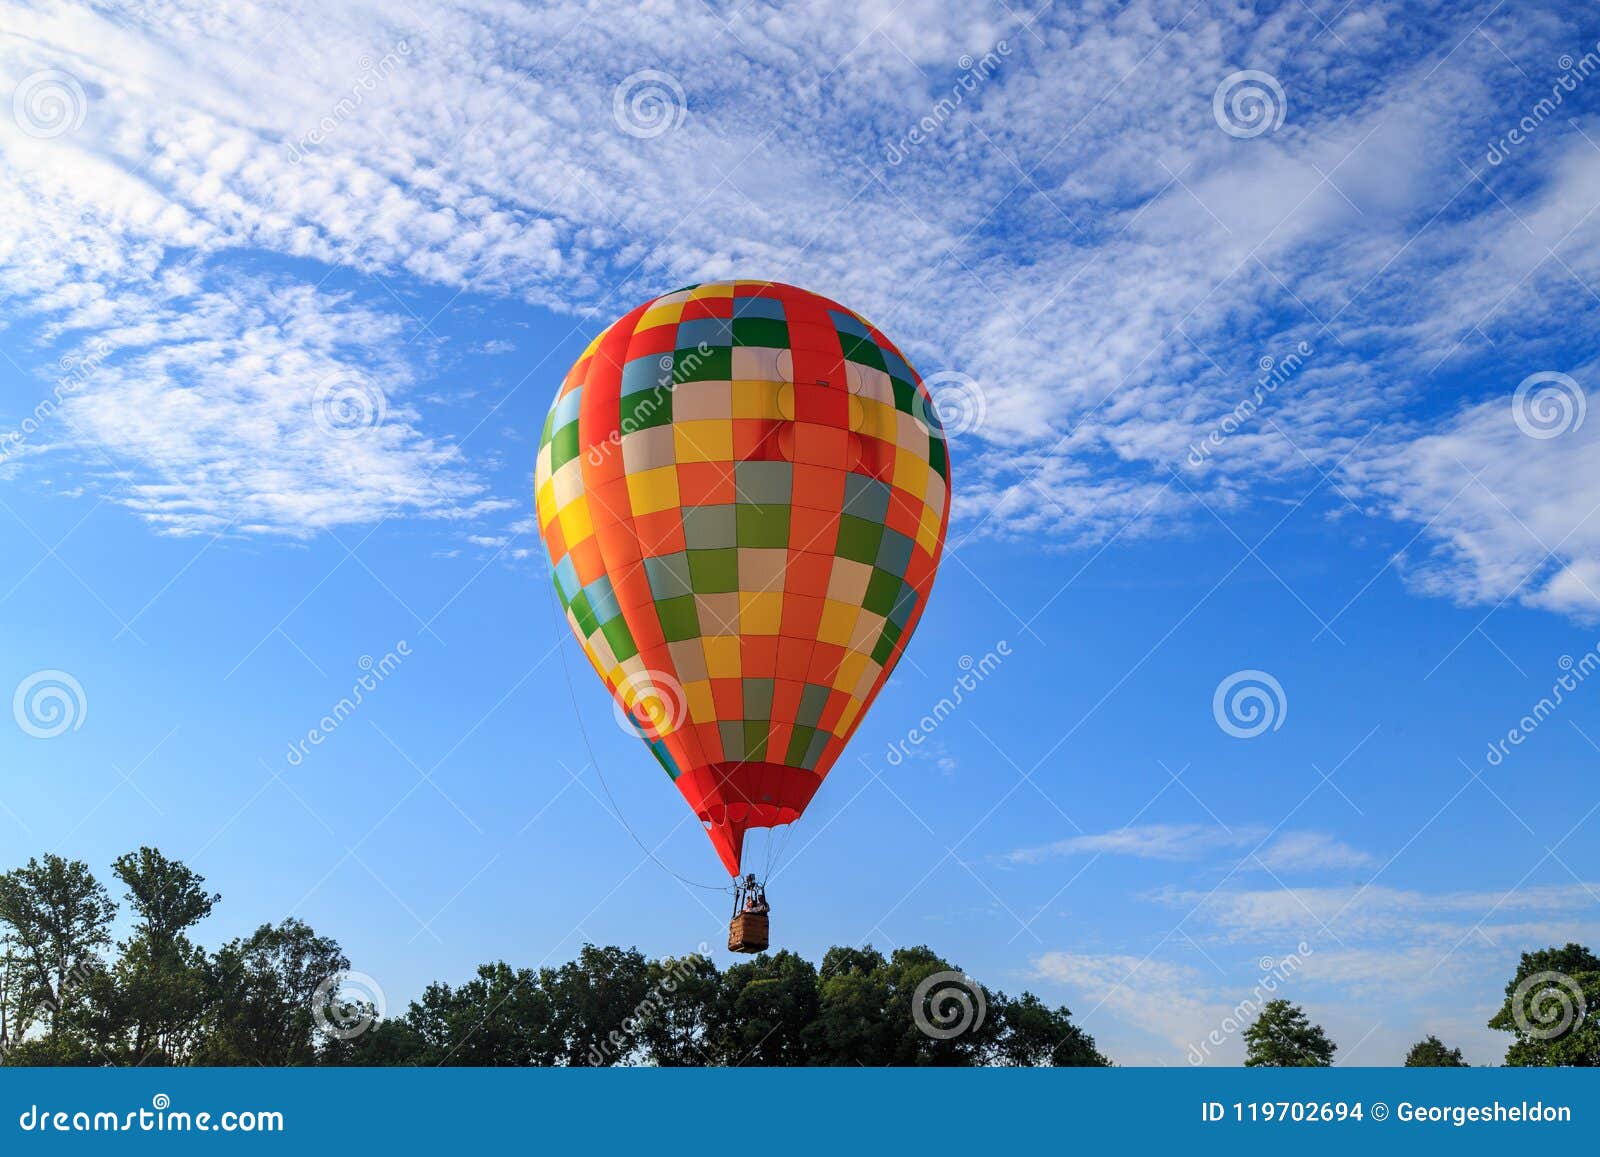 A Hot Air Balloon In Flight Editorial Stock Image Image Of